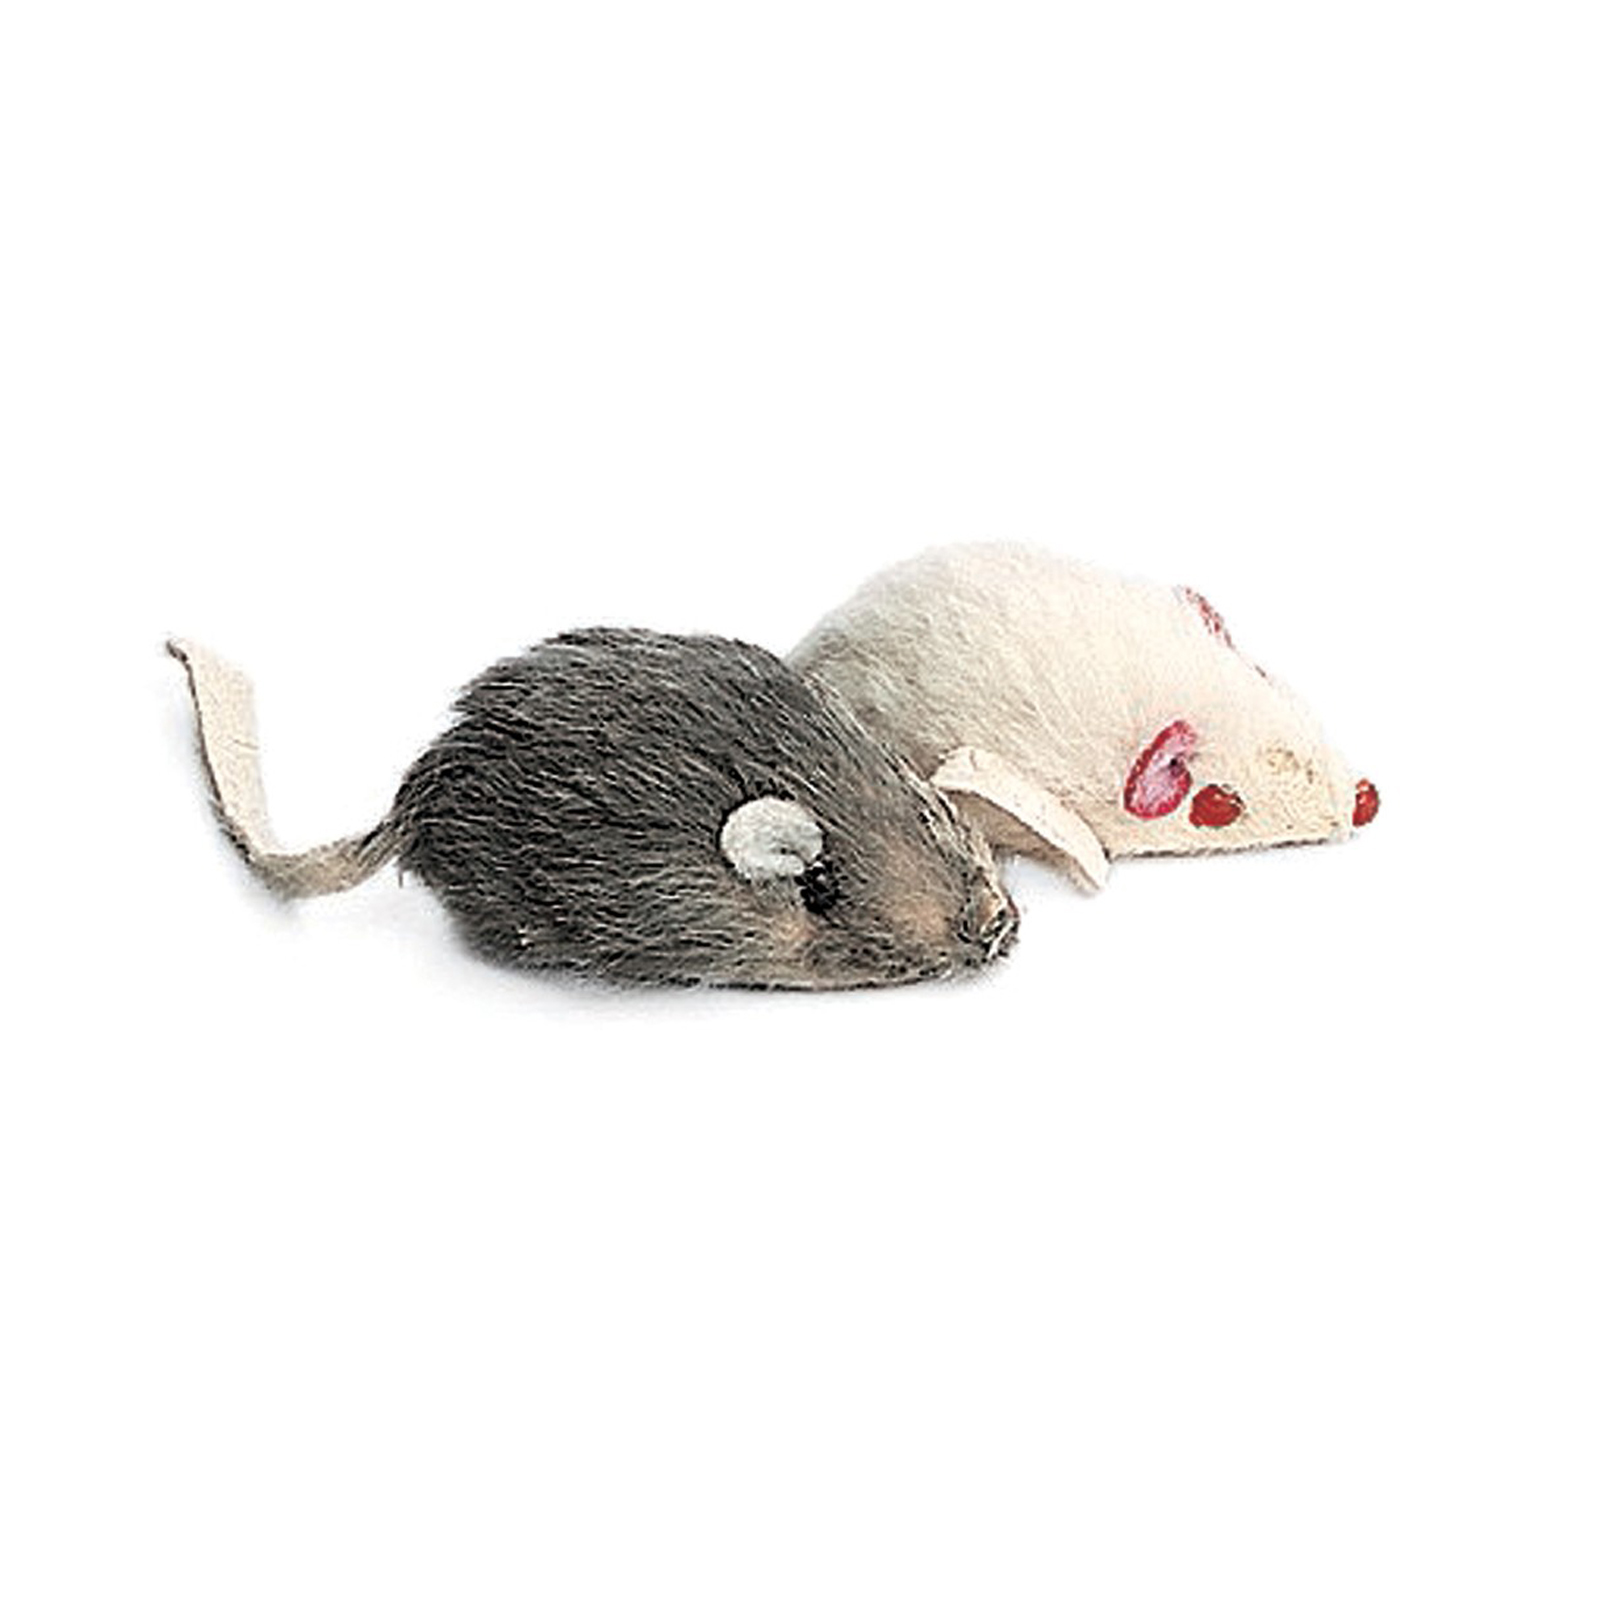 Ethical Products Inc. Toy Smooth Mouse 2 in. 2 pk.